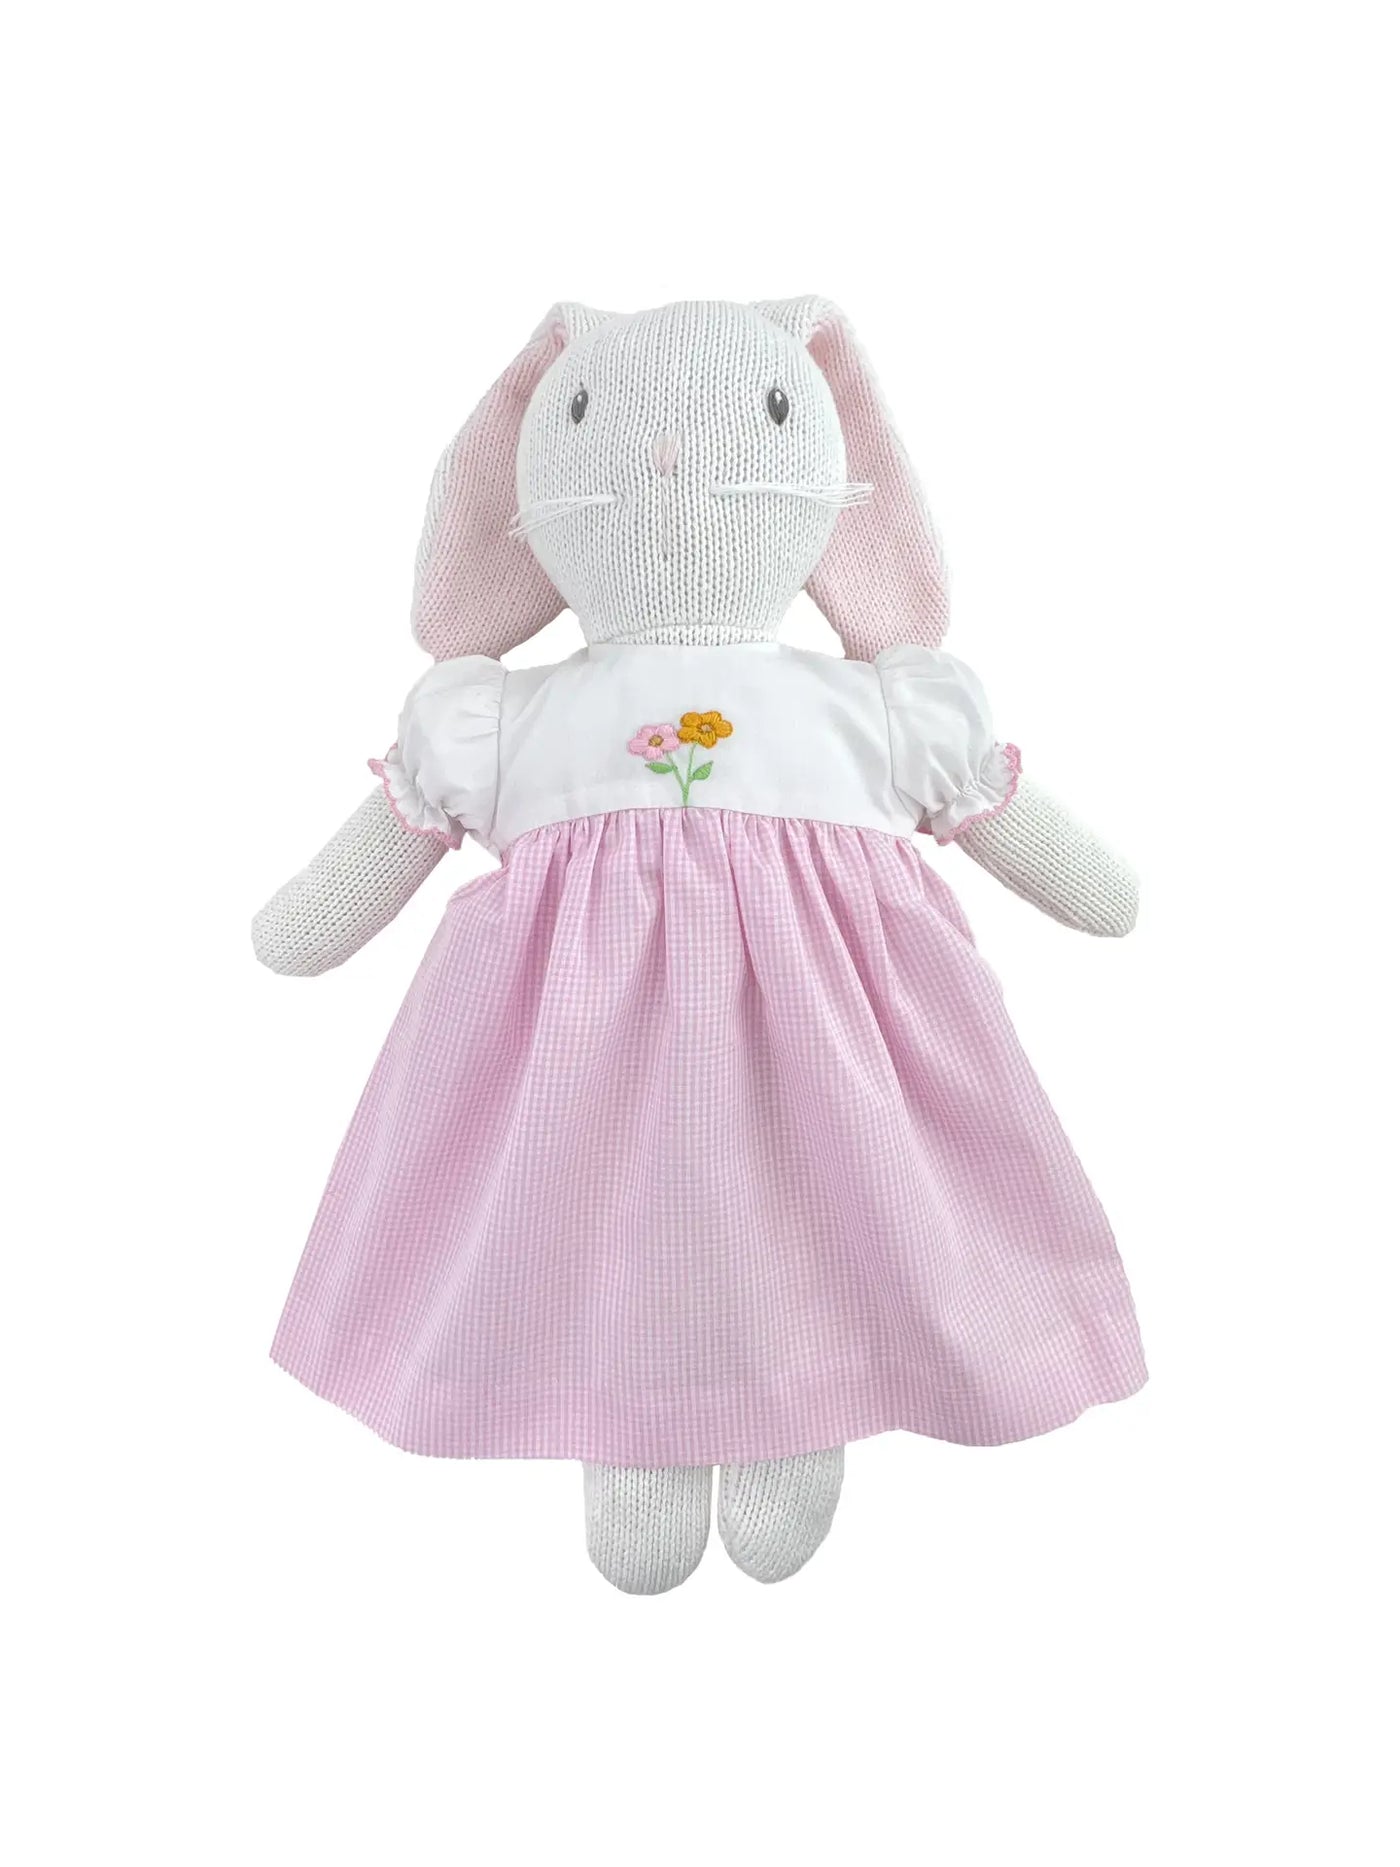 Knit Bunny Doll w/Embroidered Dress